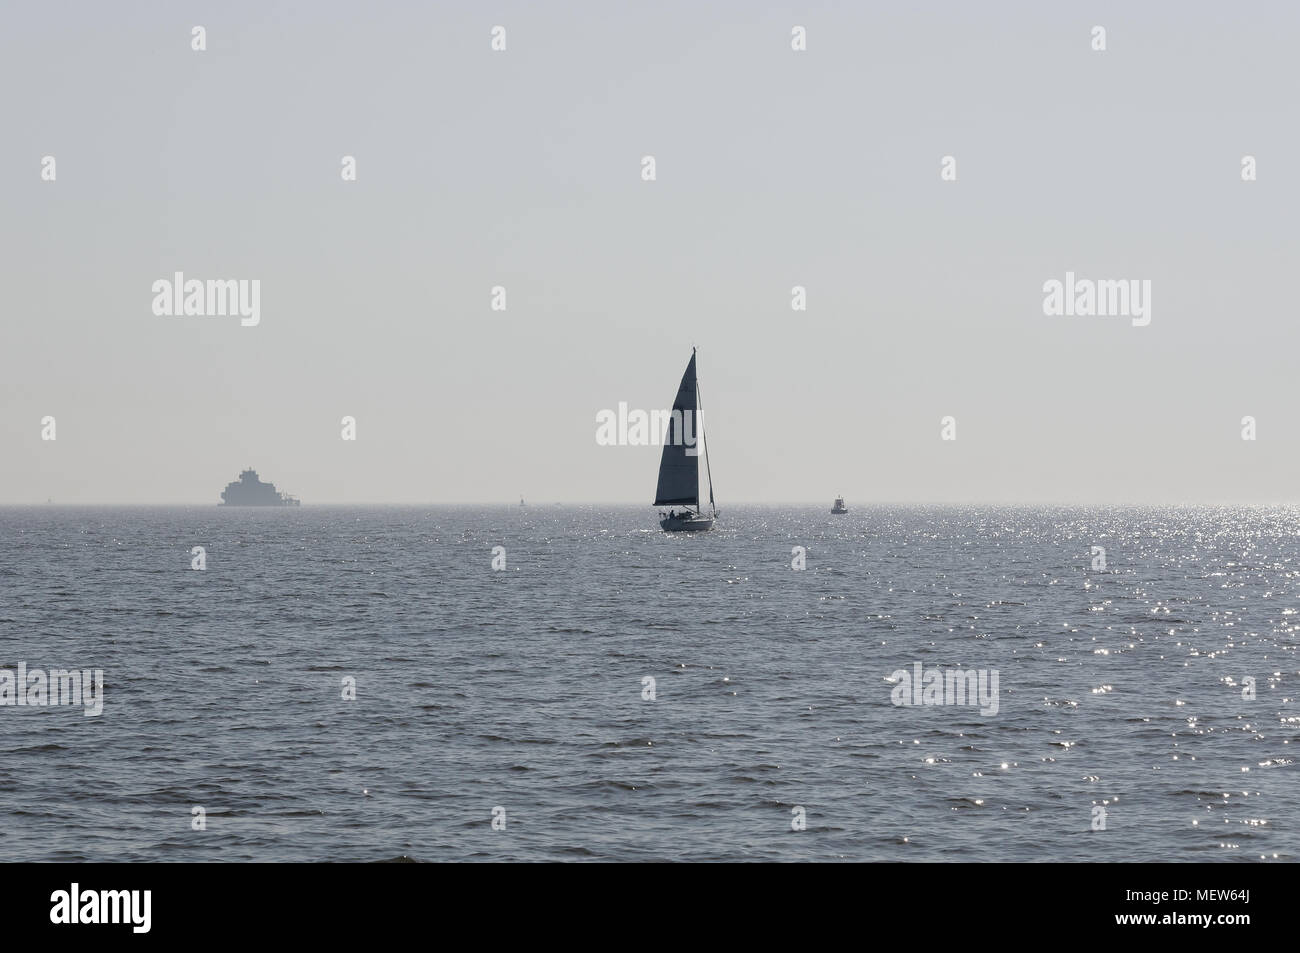 A sailing boat in the Humber Estuary, England Stock Photo